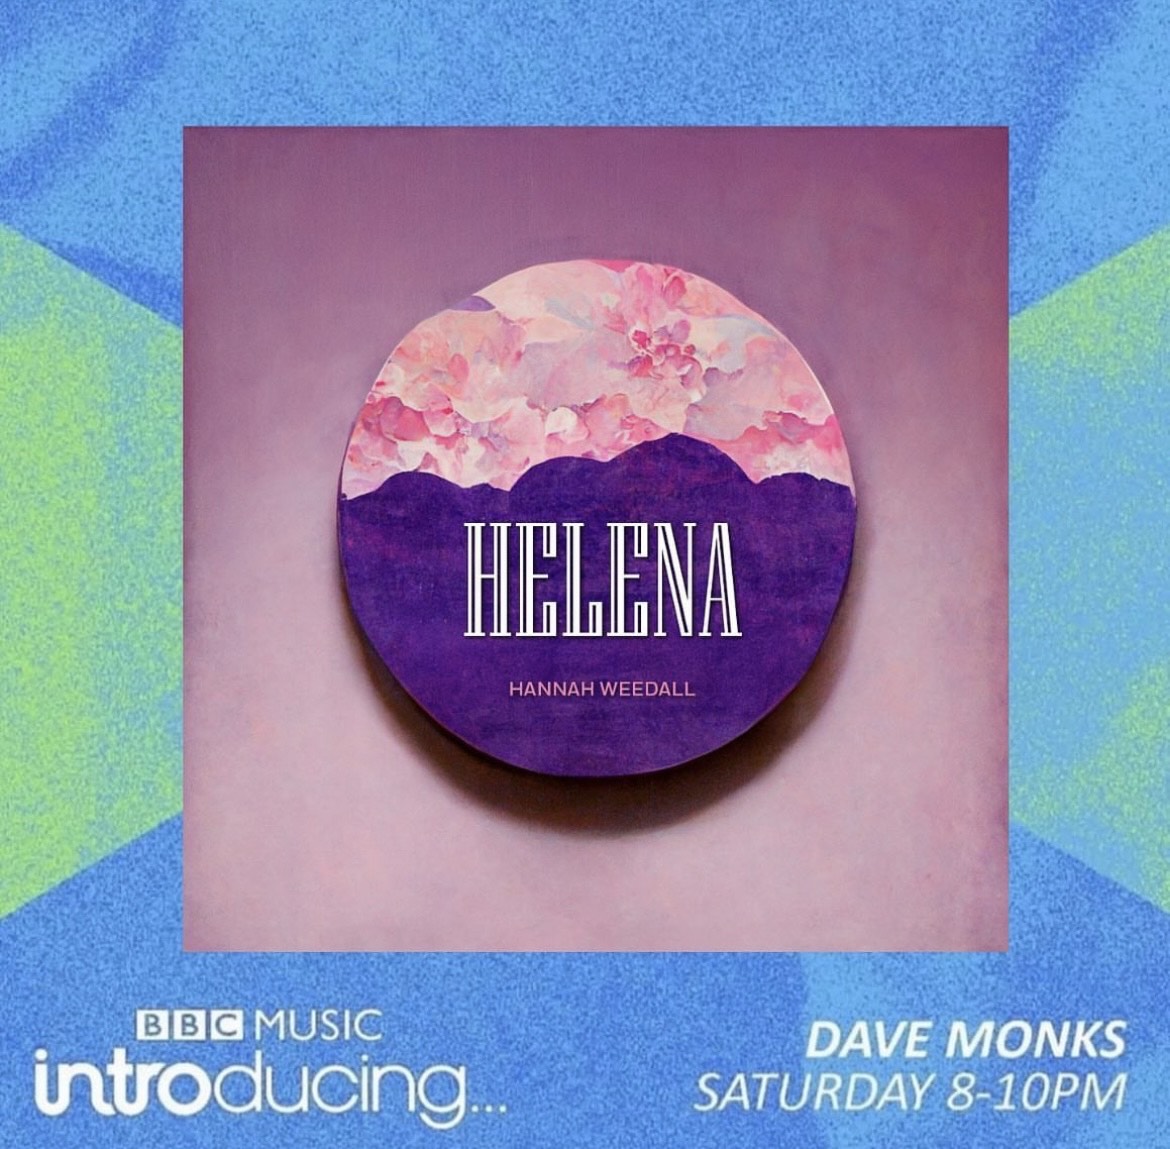 'Helena' got another spin on @bbcintroducing on Saturday night! Thank you to @Dave_Monks for the play. If you missed it, you can catch the whole show here bbc.co.uk/programmes/p0g… and stream Helena in full on spotify :))